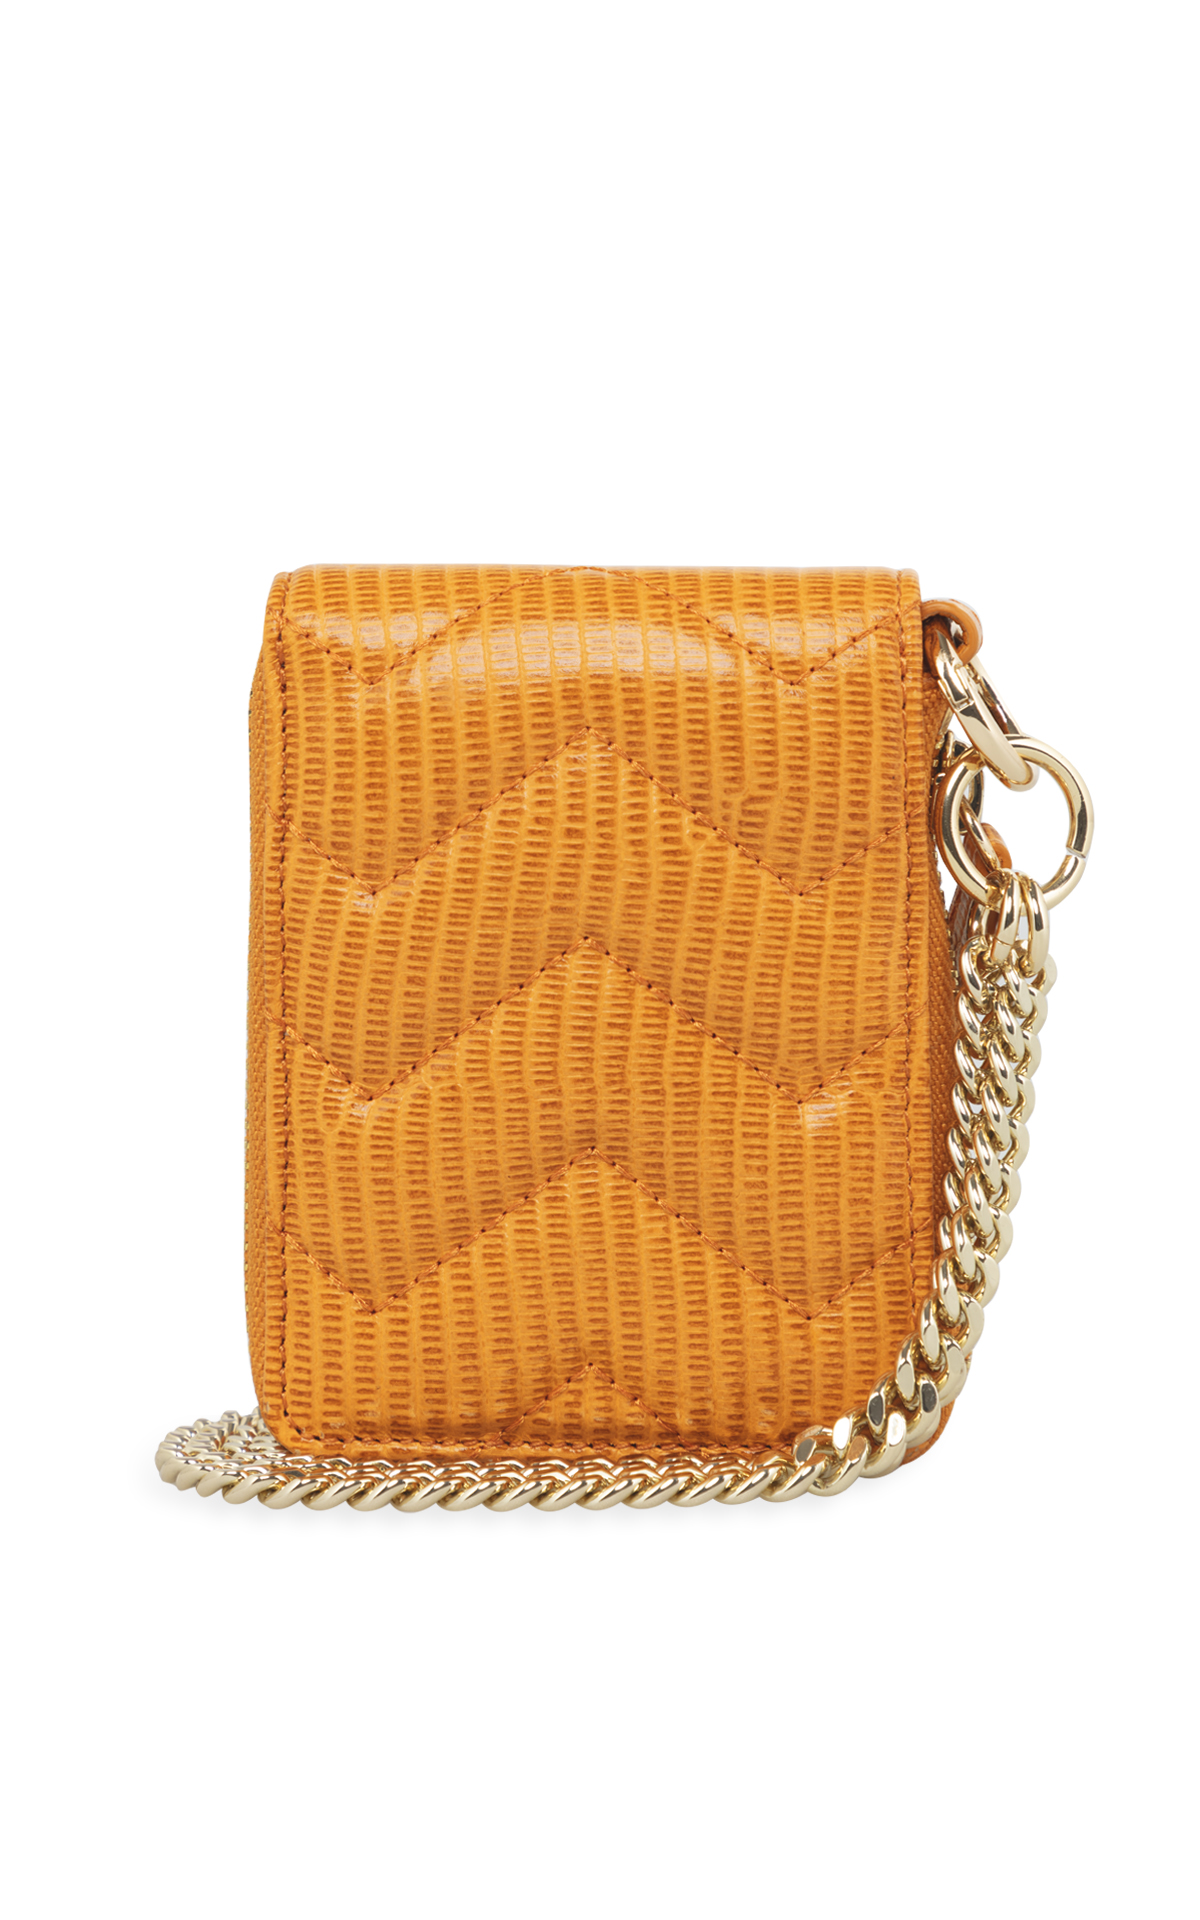 Purse with gold chain